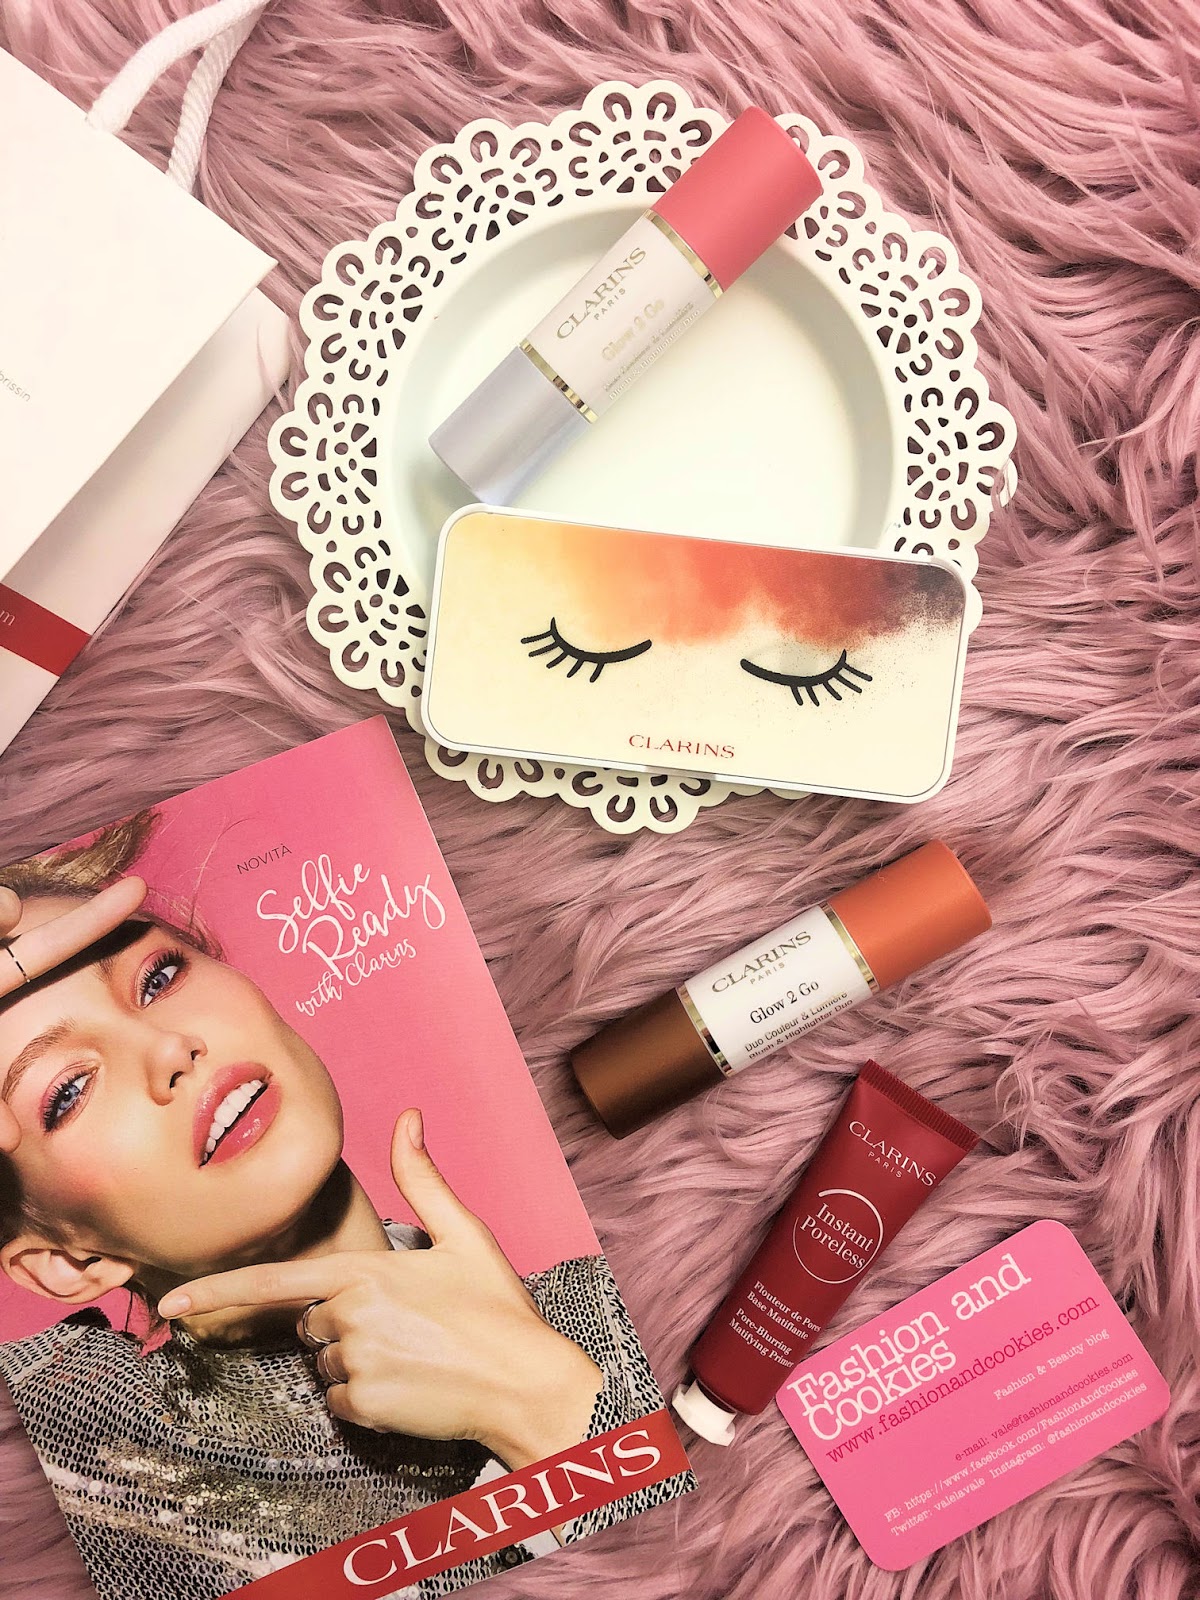 Clarins Selfie Ready collezione makeup primavera 2019 on Fashion and Cookies beauty blog, beauty blogger